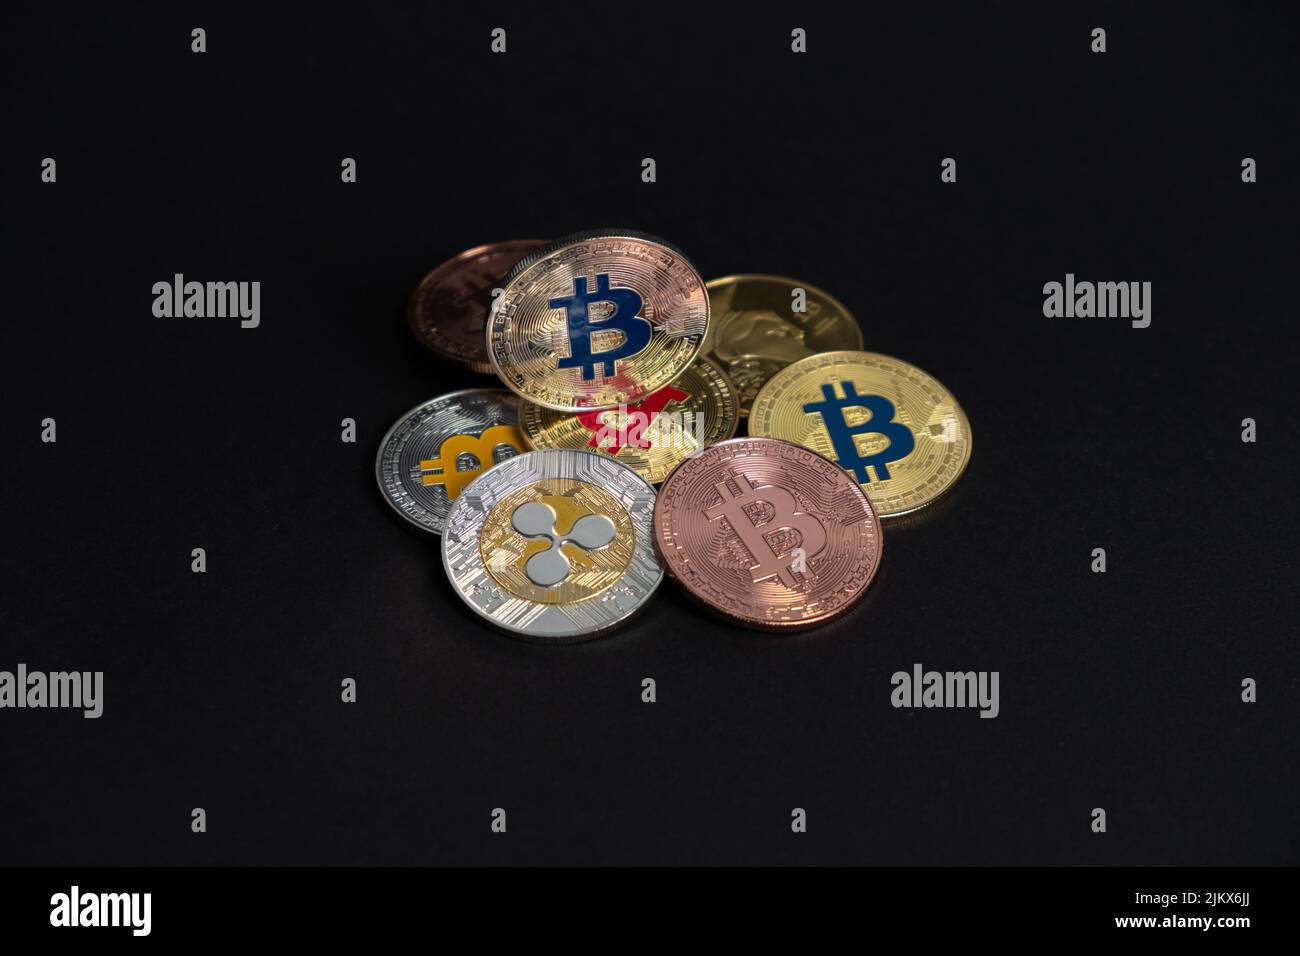 Bitcoin silver coin standing on many digital coins, in a grey background. Bitcoin - BTC Bit Coin - Crypto currency. Stock Photo